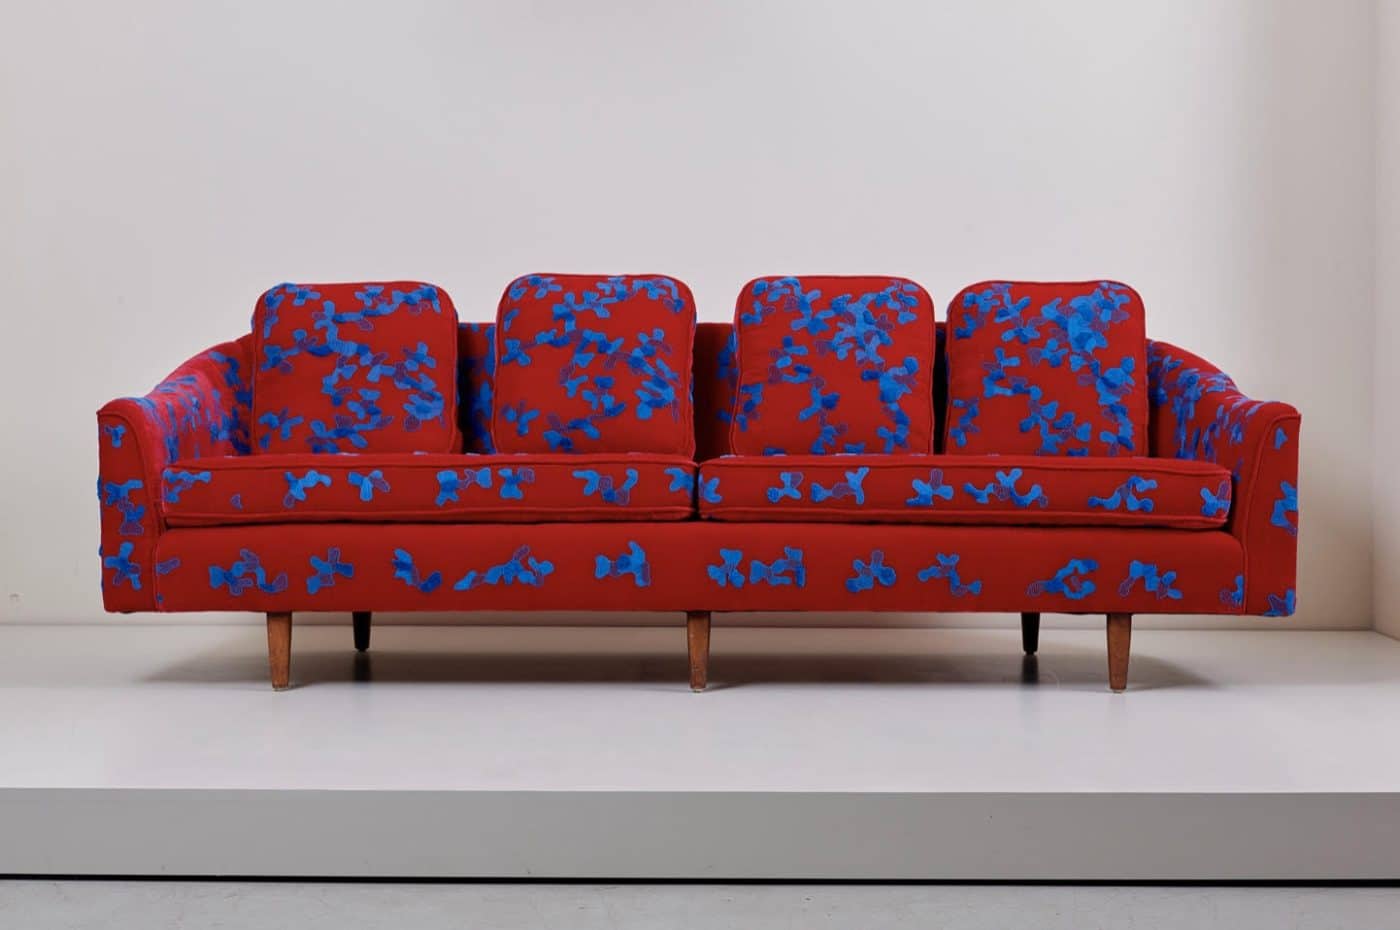 A large sofa with red upholstery custom embroidered with amorphous blue shapes